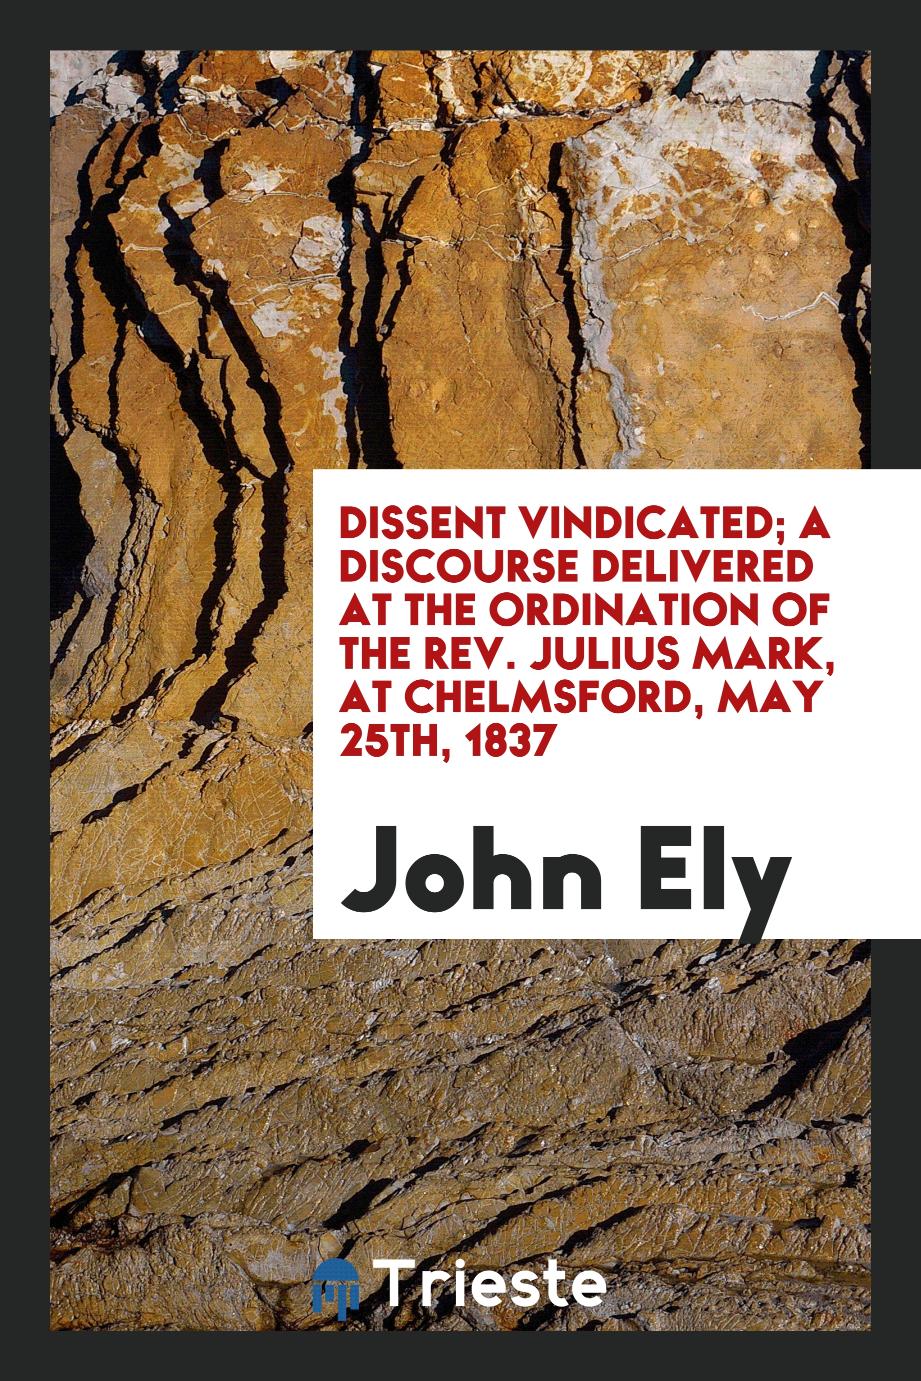 John Ely - Dissent vindicated; A discourse delivered at the ordination of the Rev. Julius Mark, at Chelmsford, May 25th, 1837